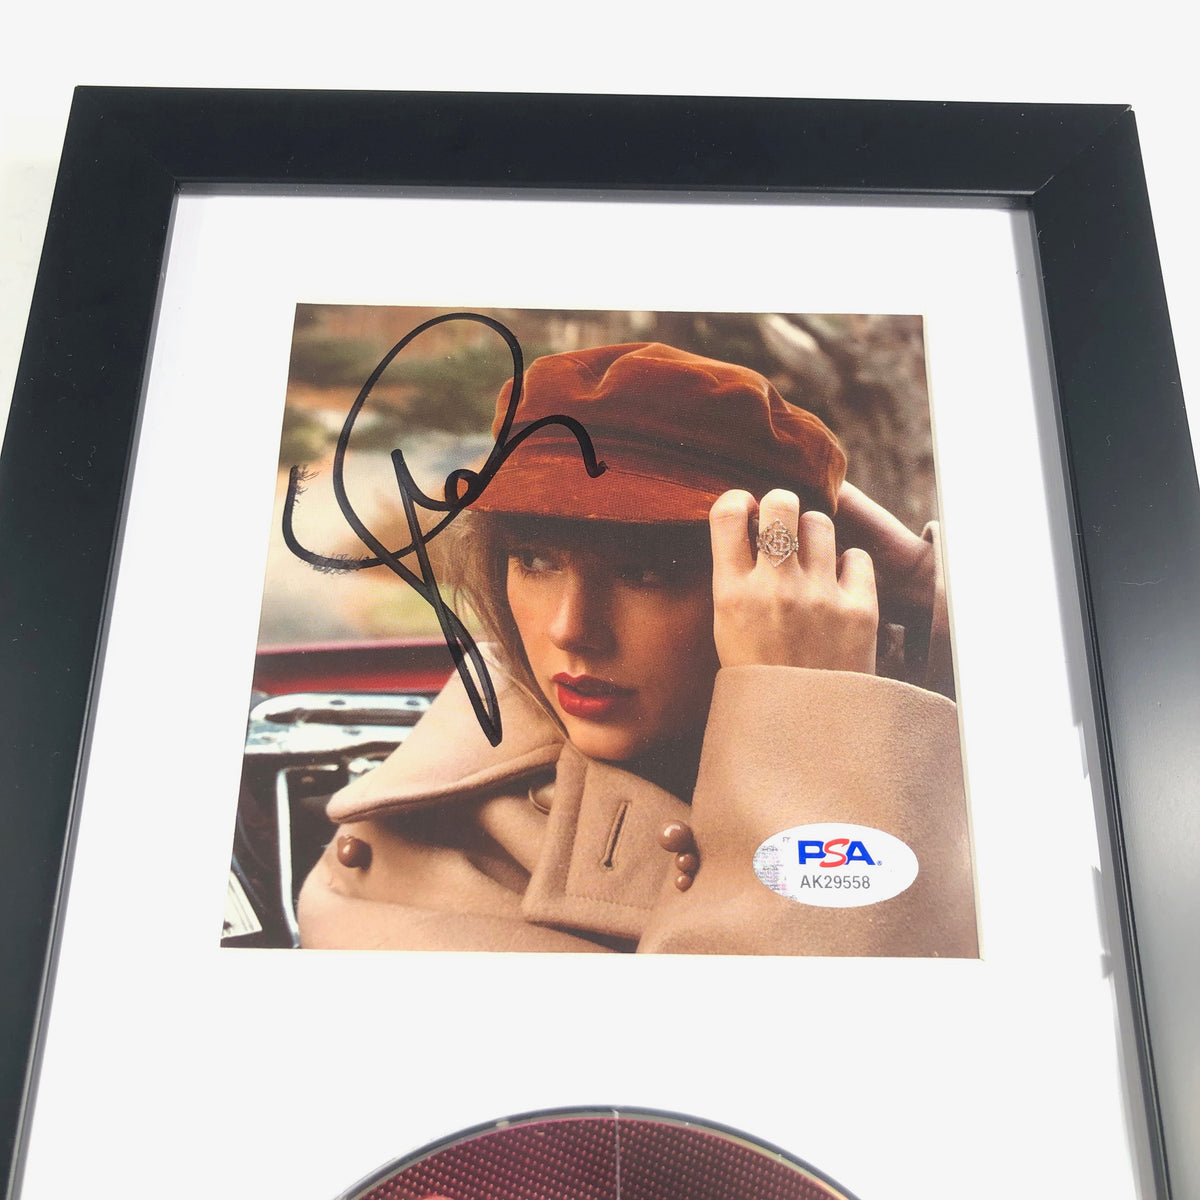 Lot Detail - Taylor Swift Signed Folklore CD Covers Pair (2) (Graded  PSA/DNA 9)